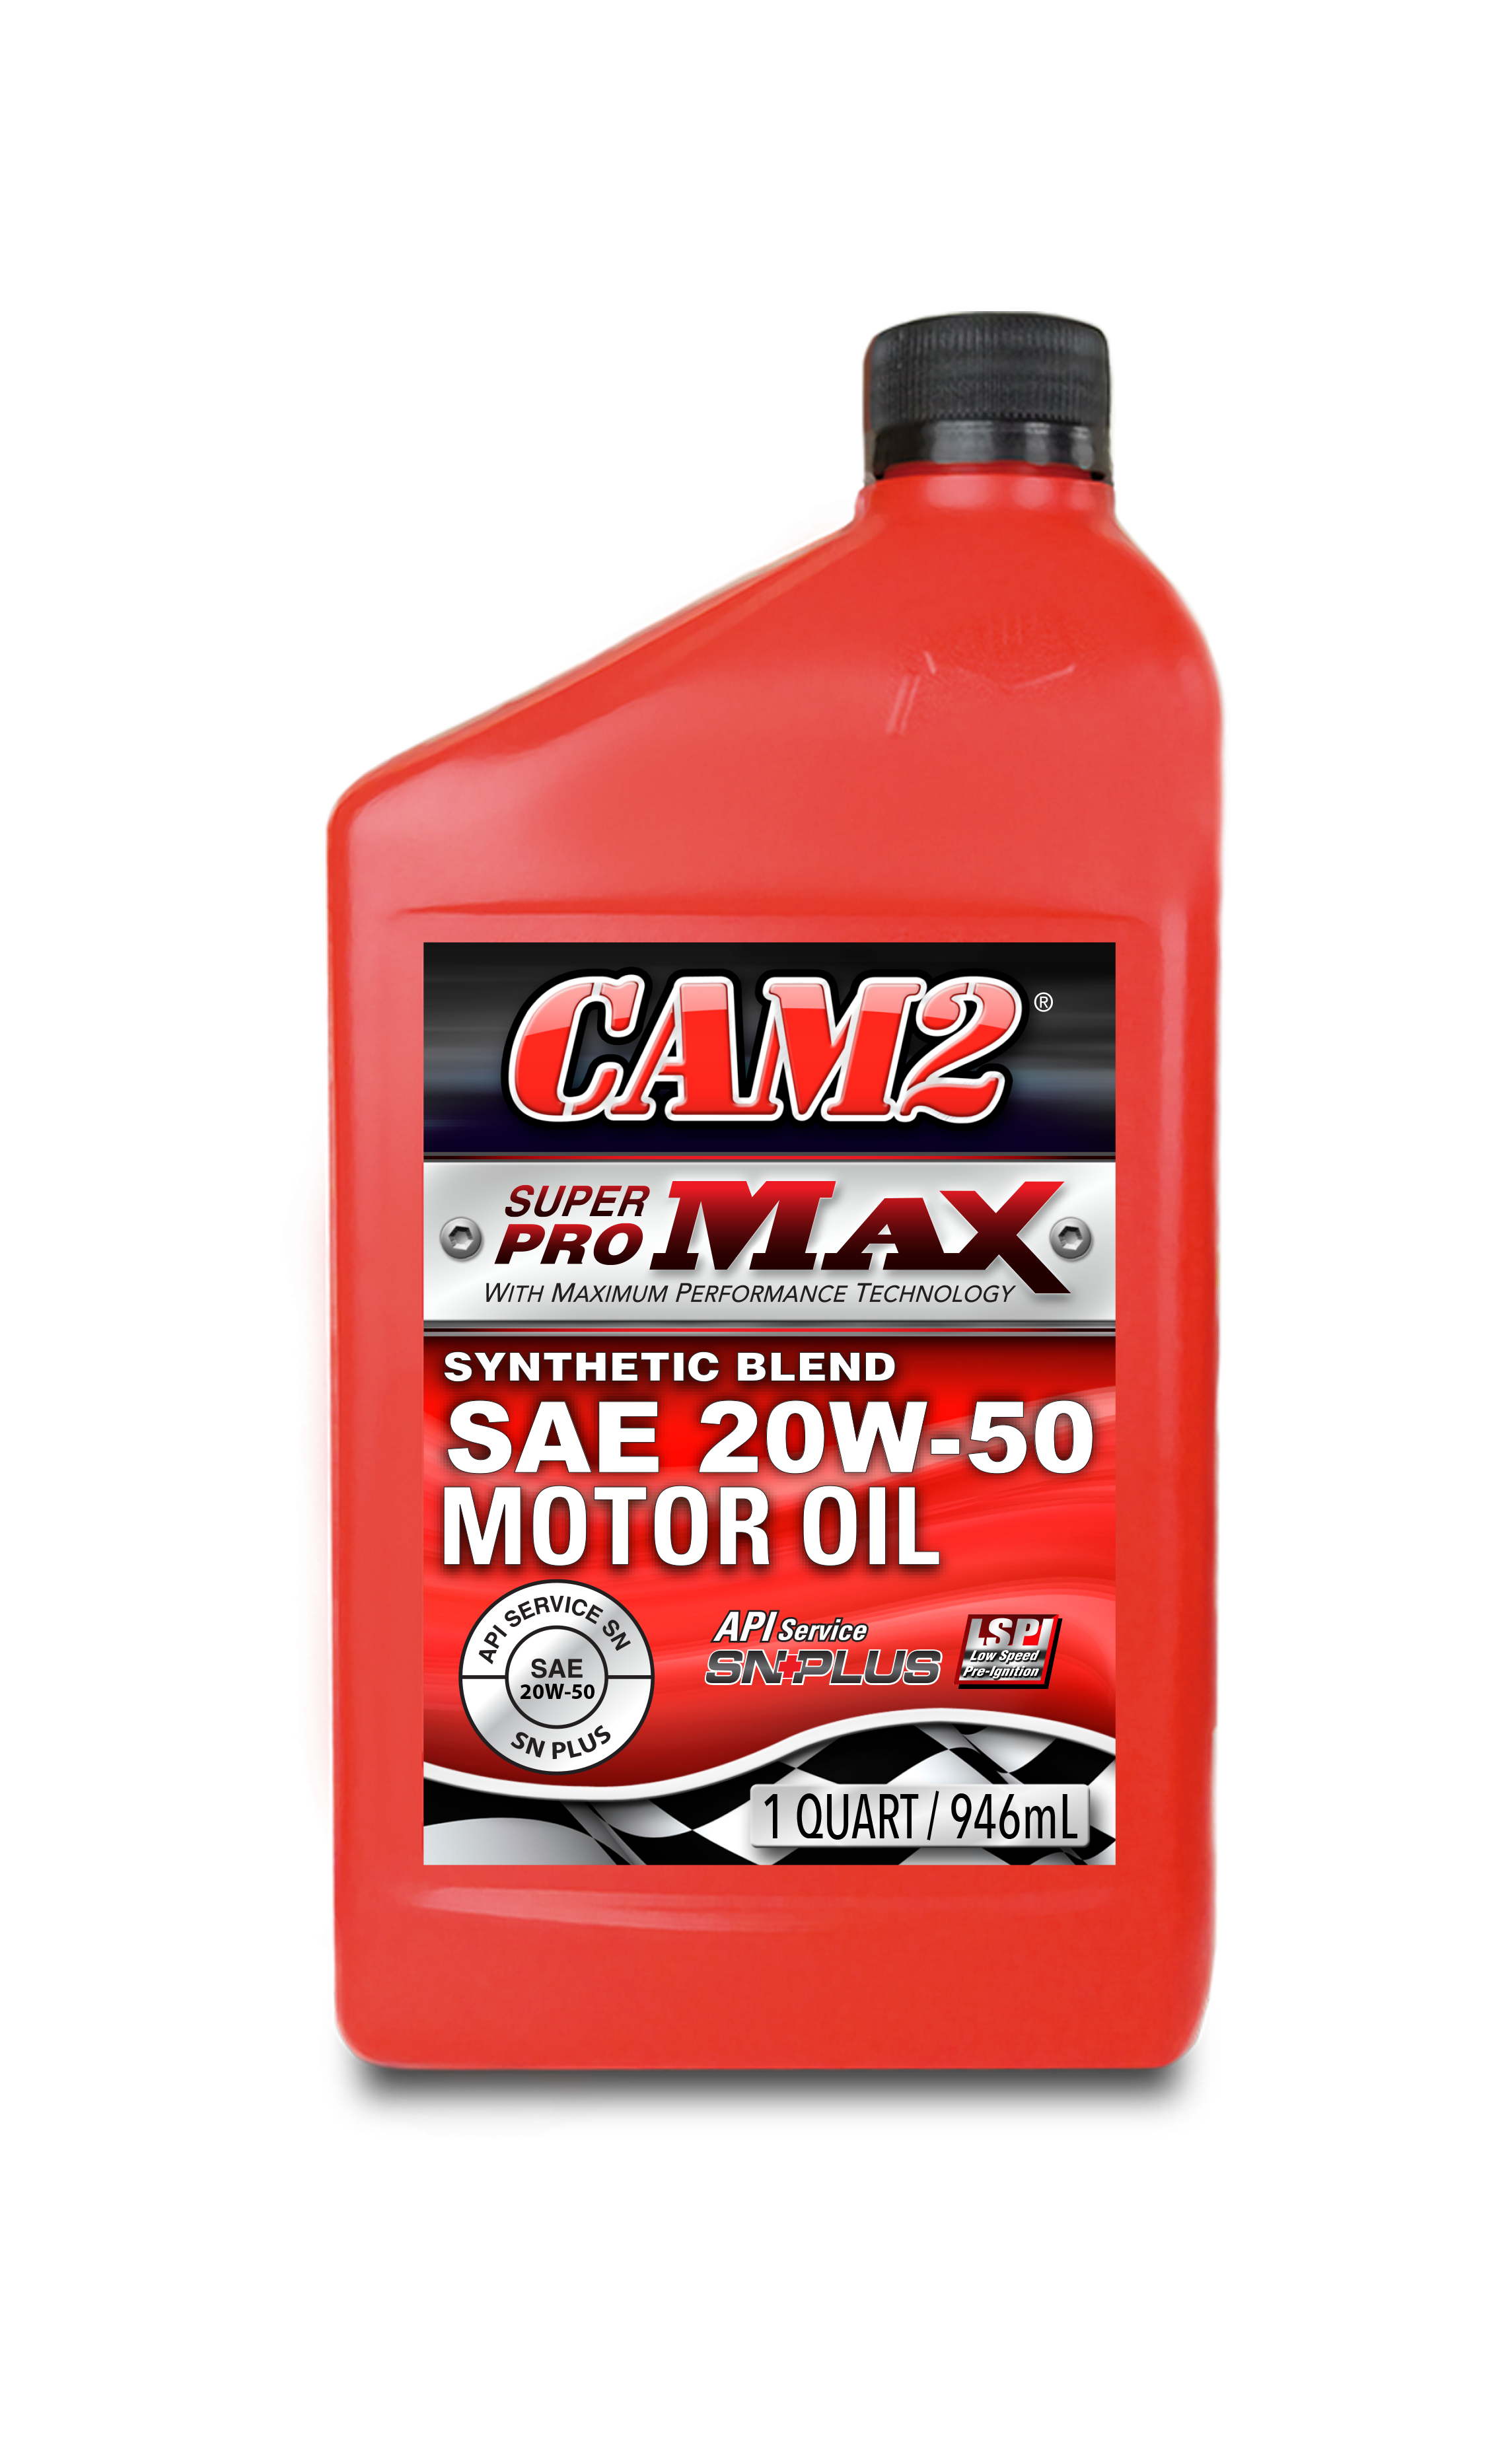 CAM2 SUPERPRO MAX 20W-50 SYNTHETIC BLEND MOTOR OIL 80565-417